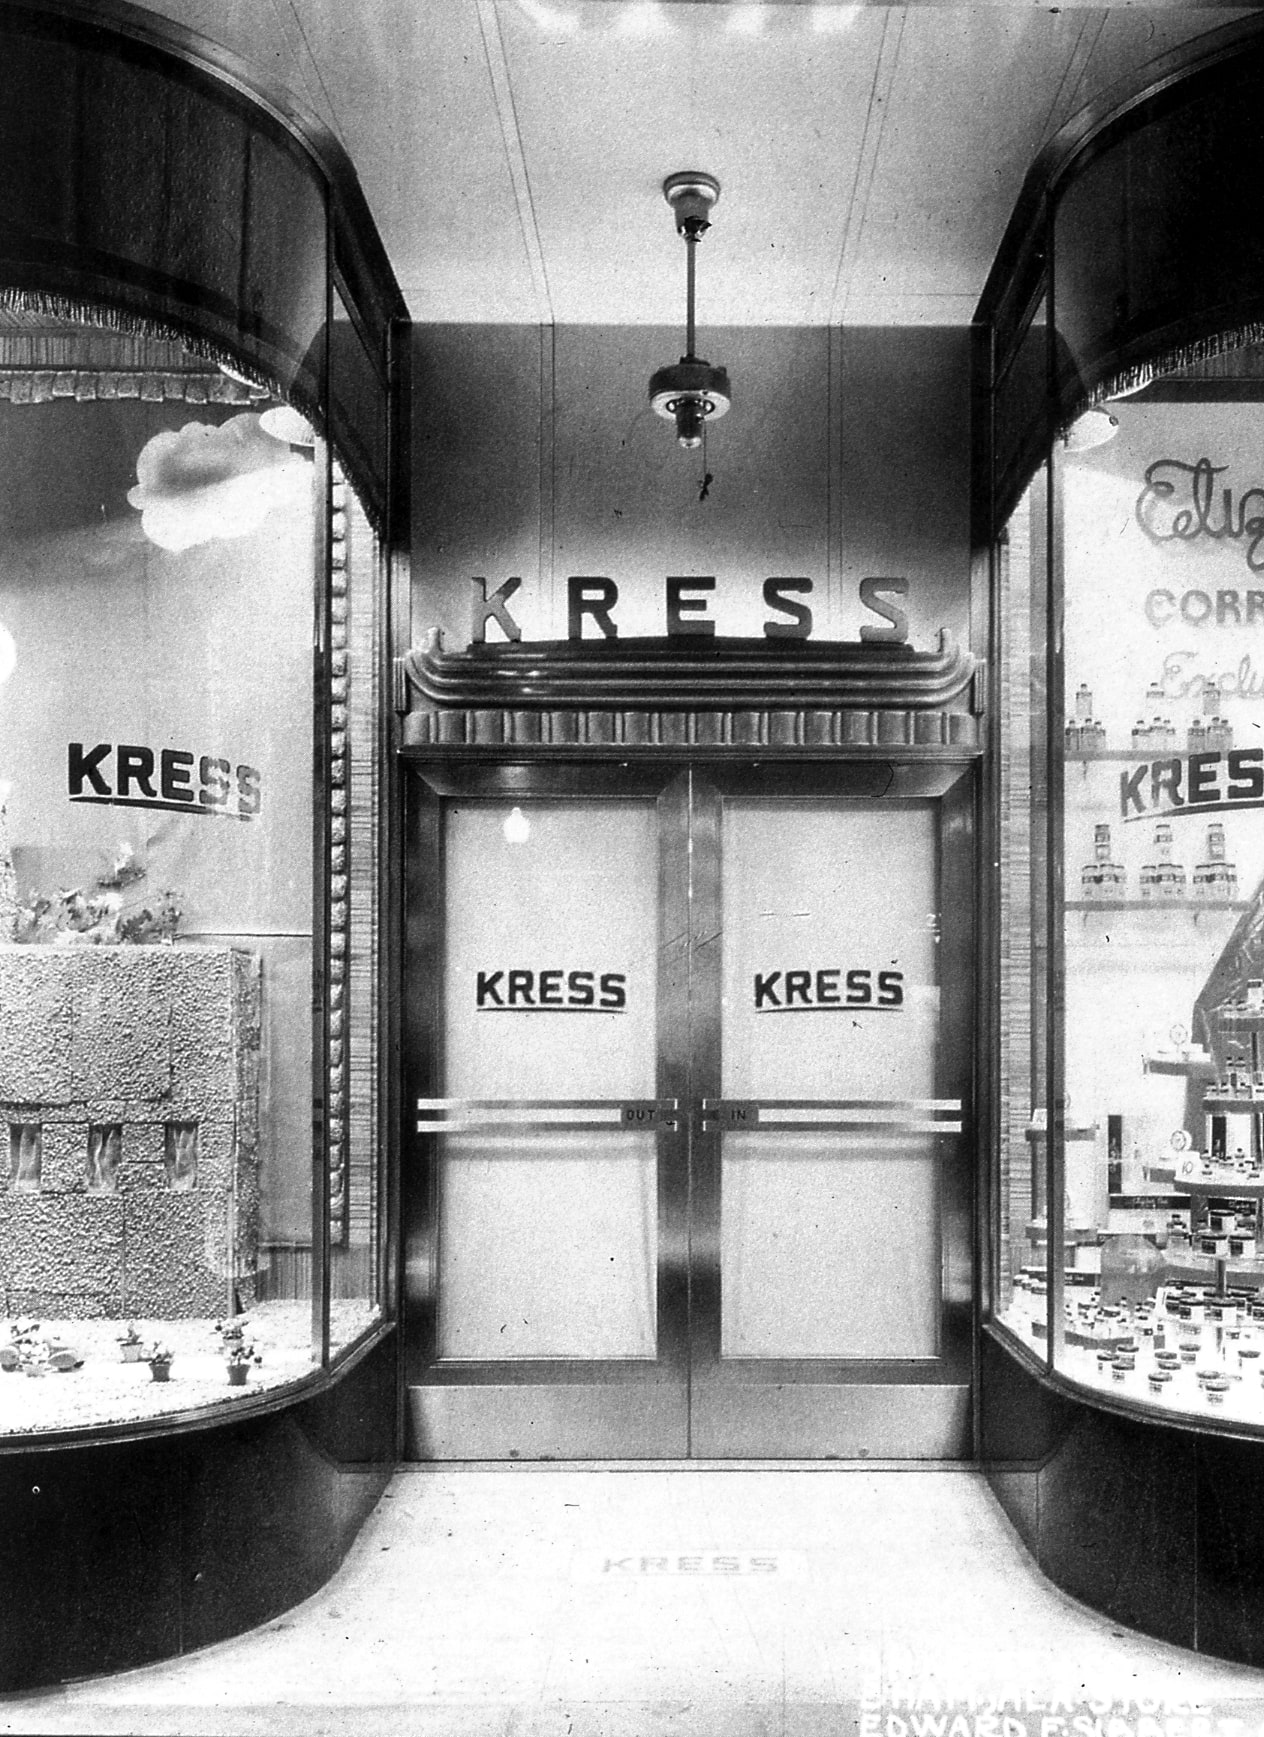 Black and white photograph of the entrance to an S.H. Kress & Company store with the curved display windows lit up.